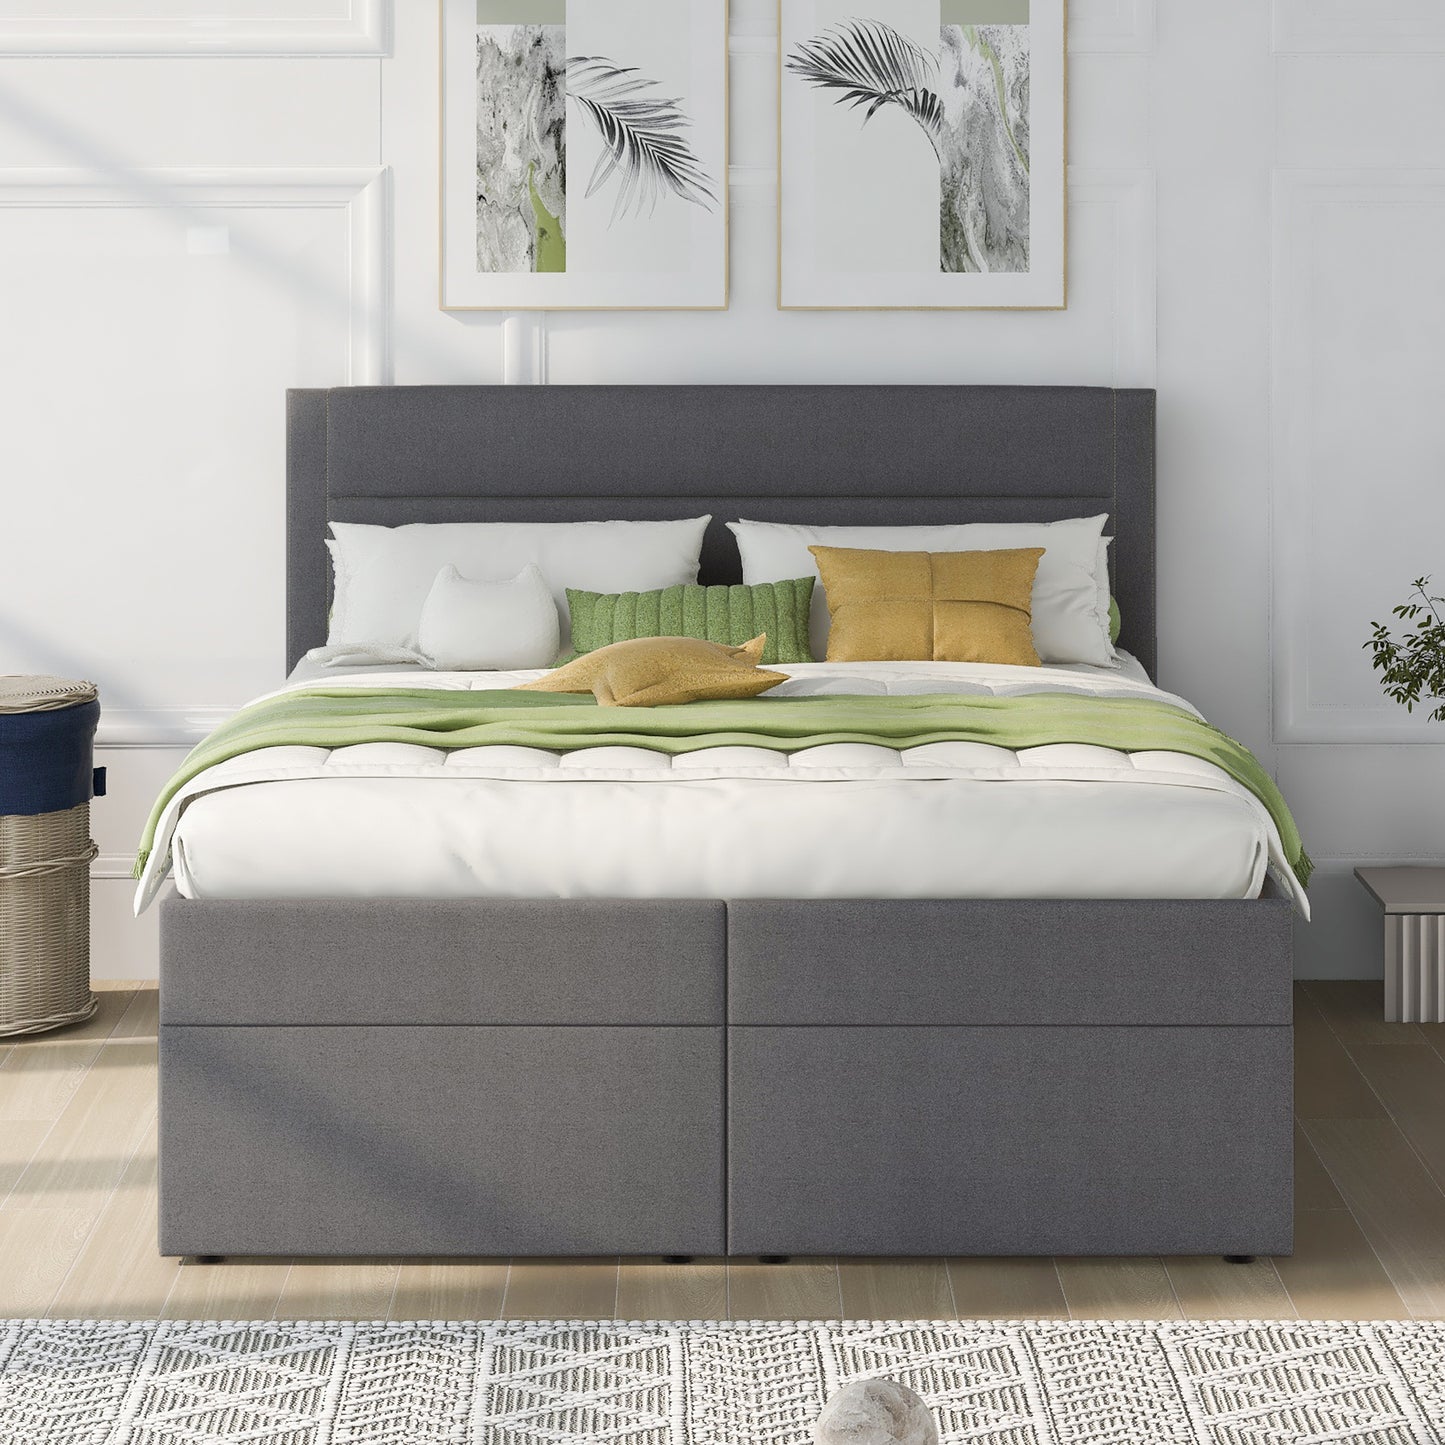 Queen Size Upholstered Platform Bed with Storage Underneath, Gray